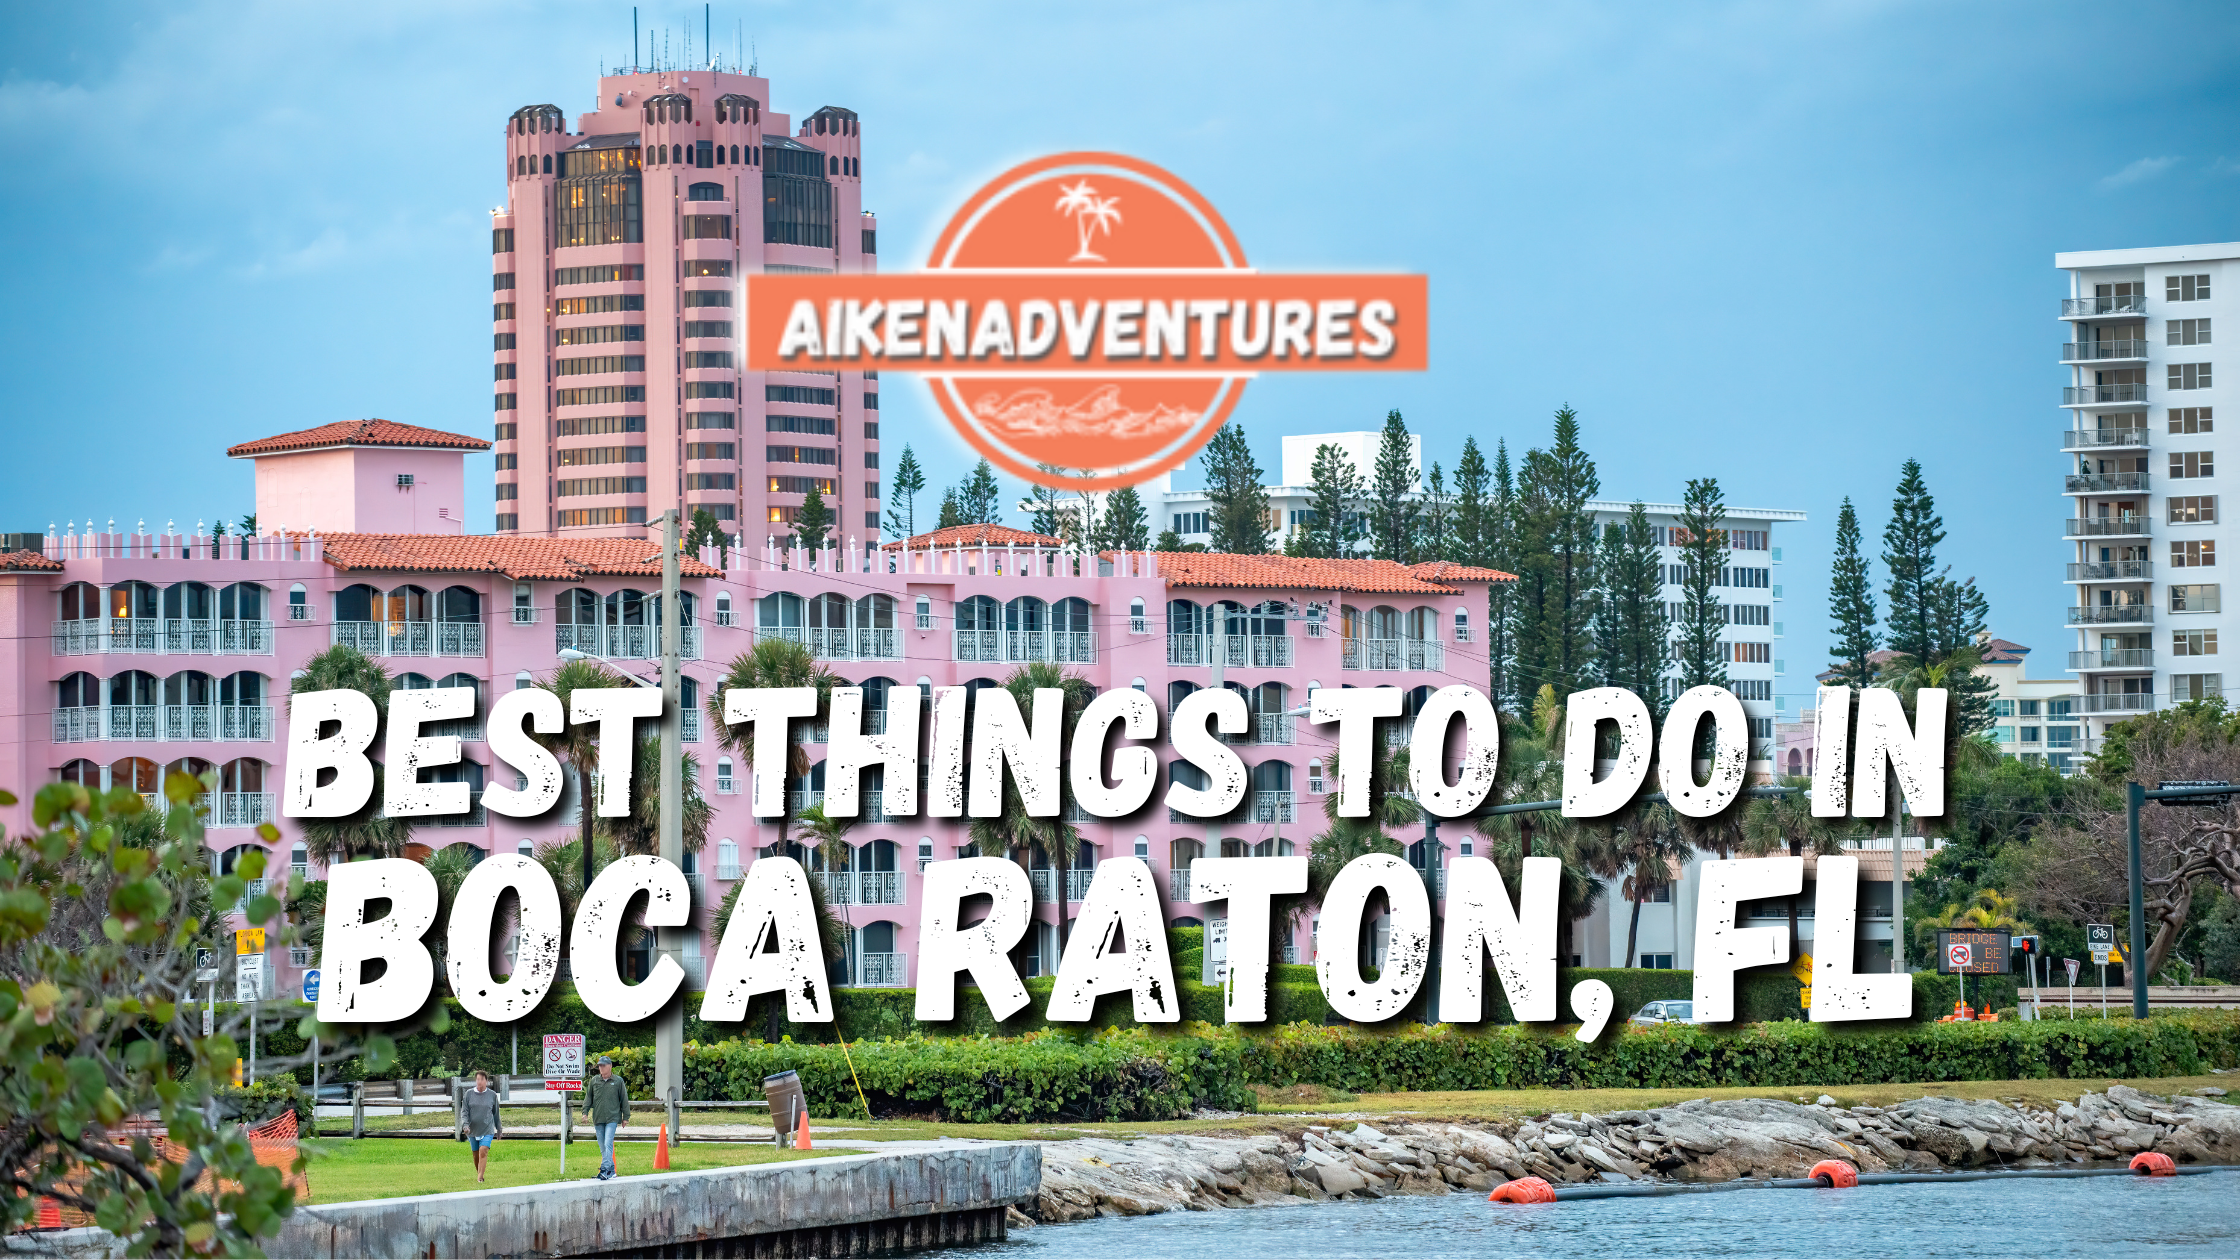 Best Things to do in Boca Raton